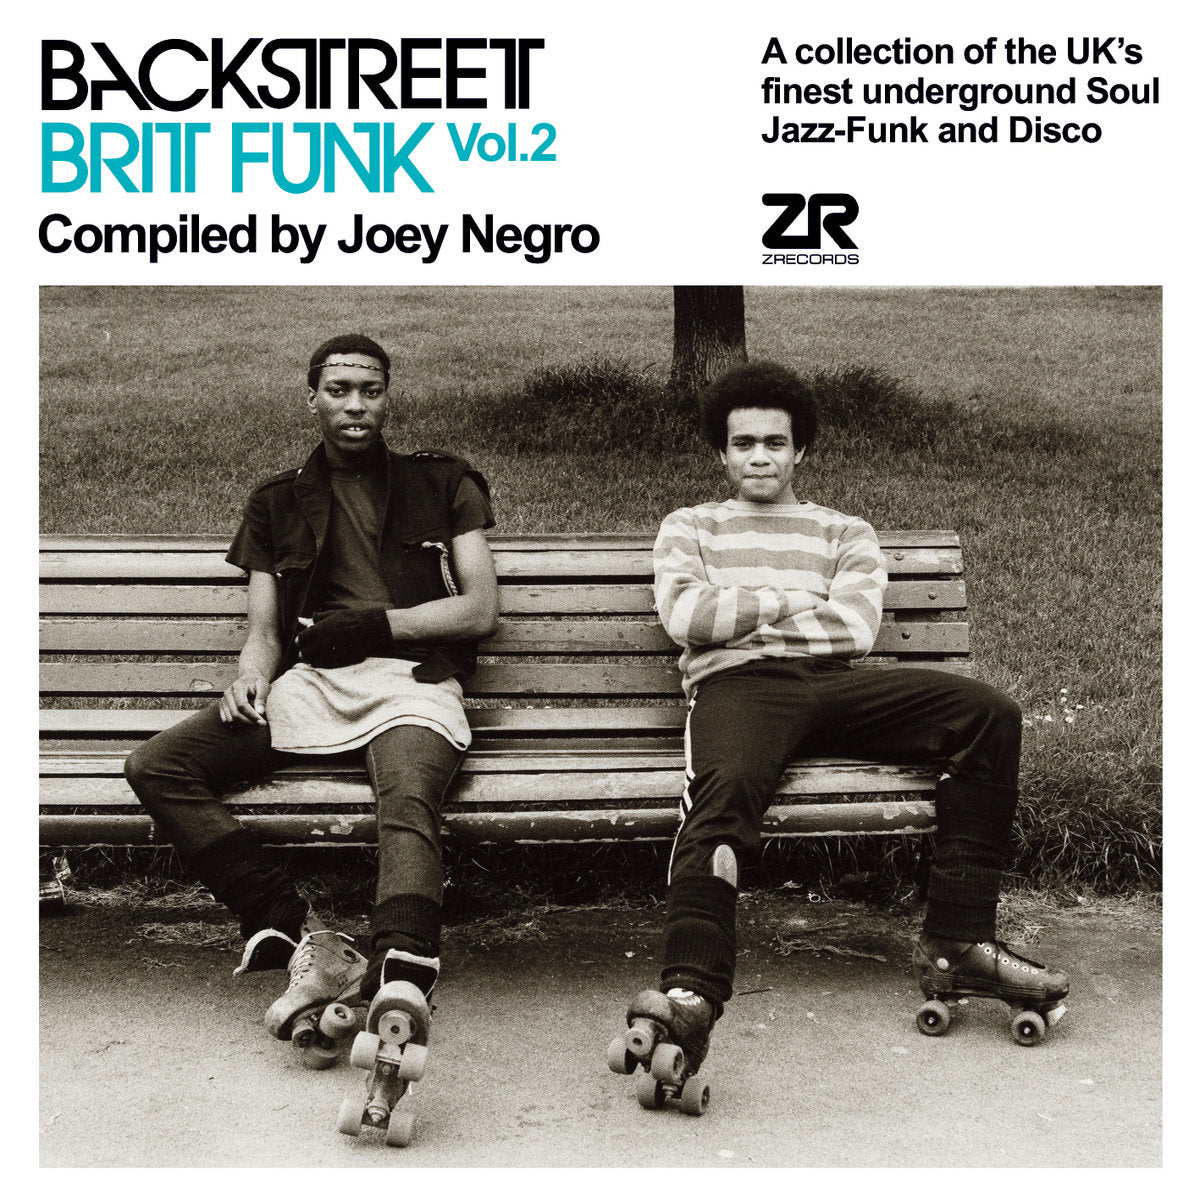 Backstreet Brit Funk Vol.2 Compiled by Joey Negro (New 2LP)